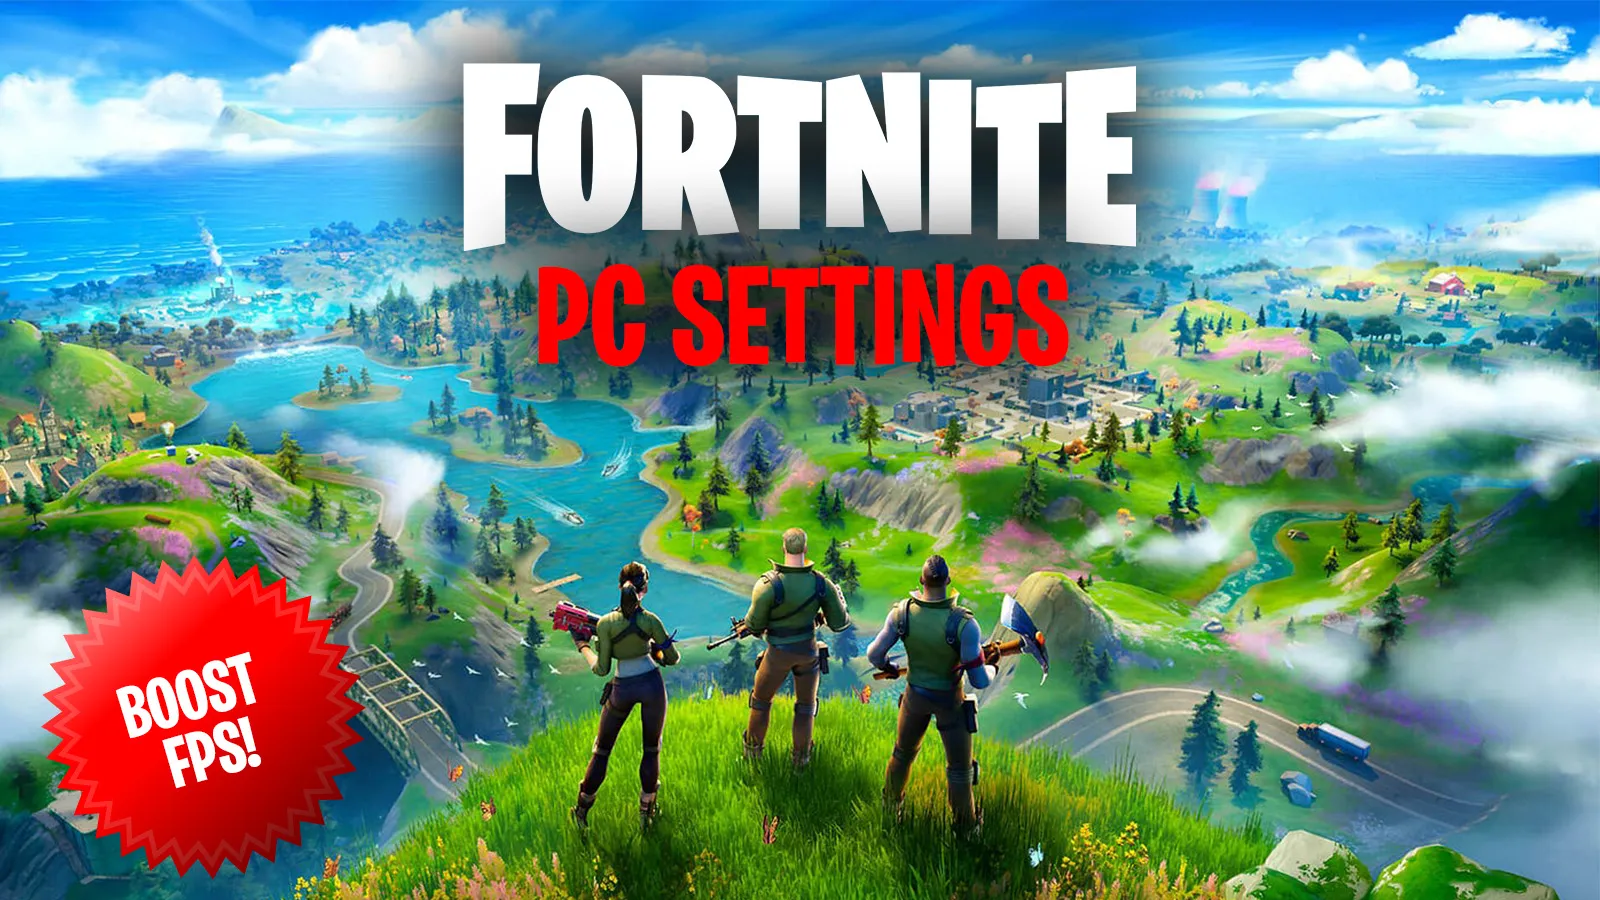 Ready or Not - Best Game Settings For Max FPS